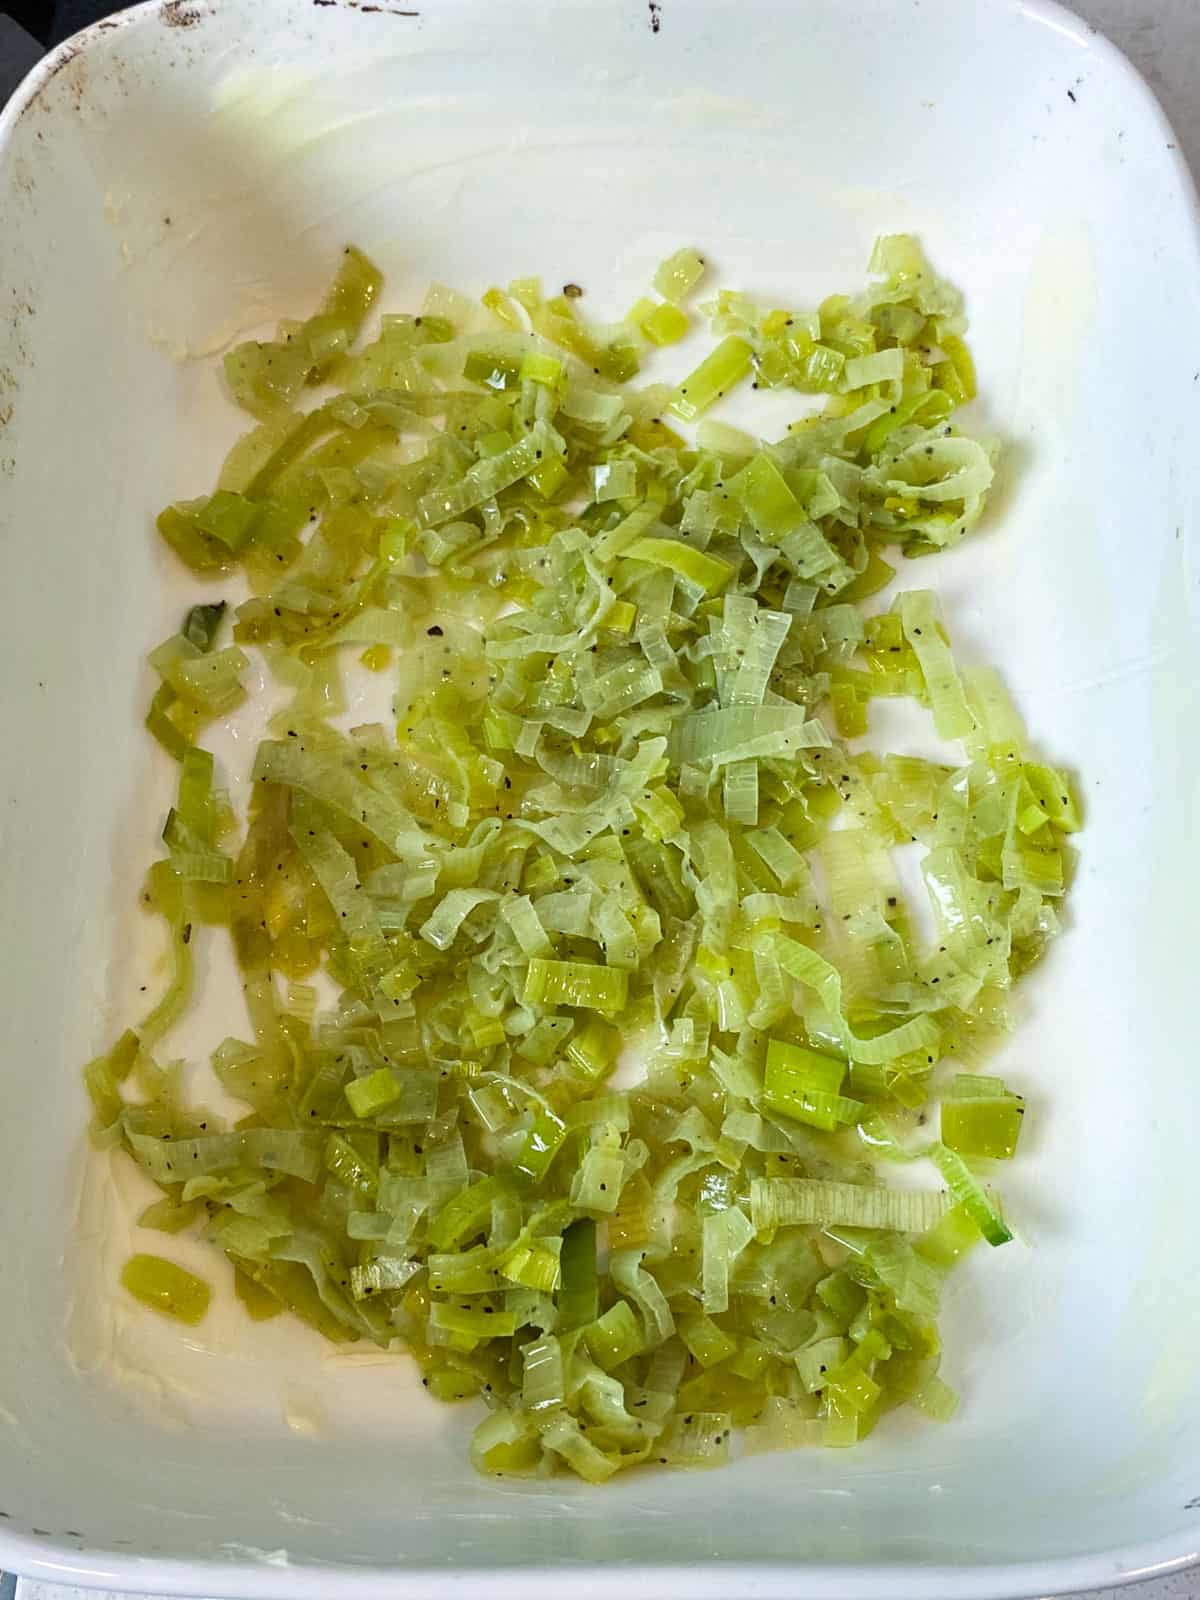 Add half of the sautéed leeks to the bottom of a buttered baking dish.